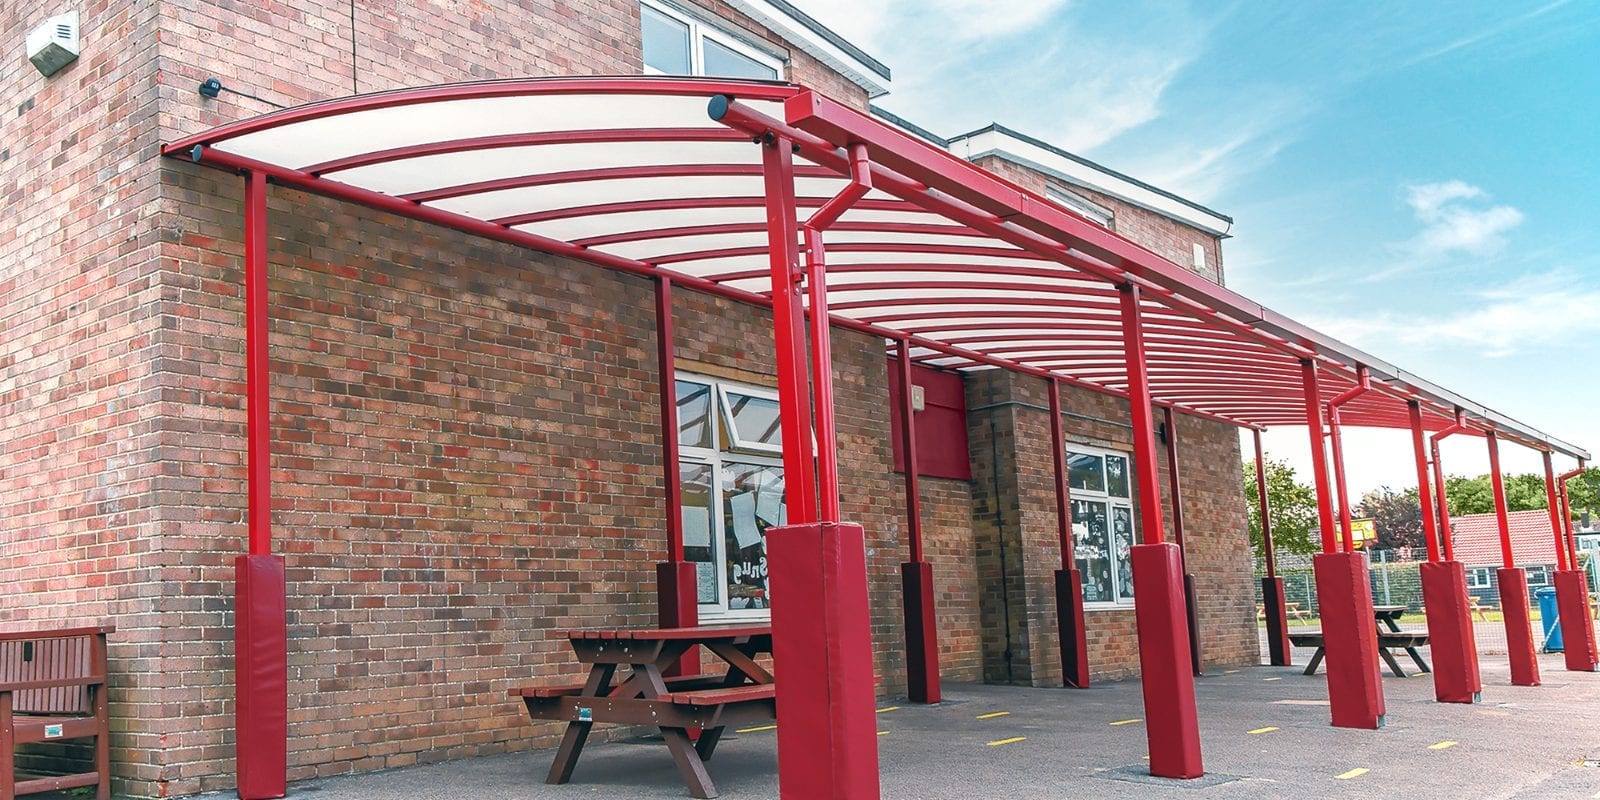 Playground shelter we made for Covingham Park Primary School